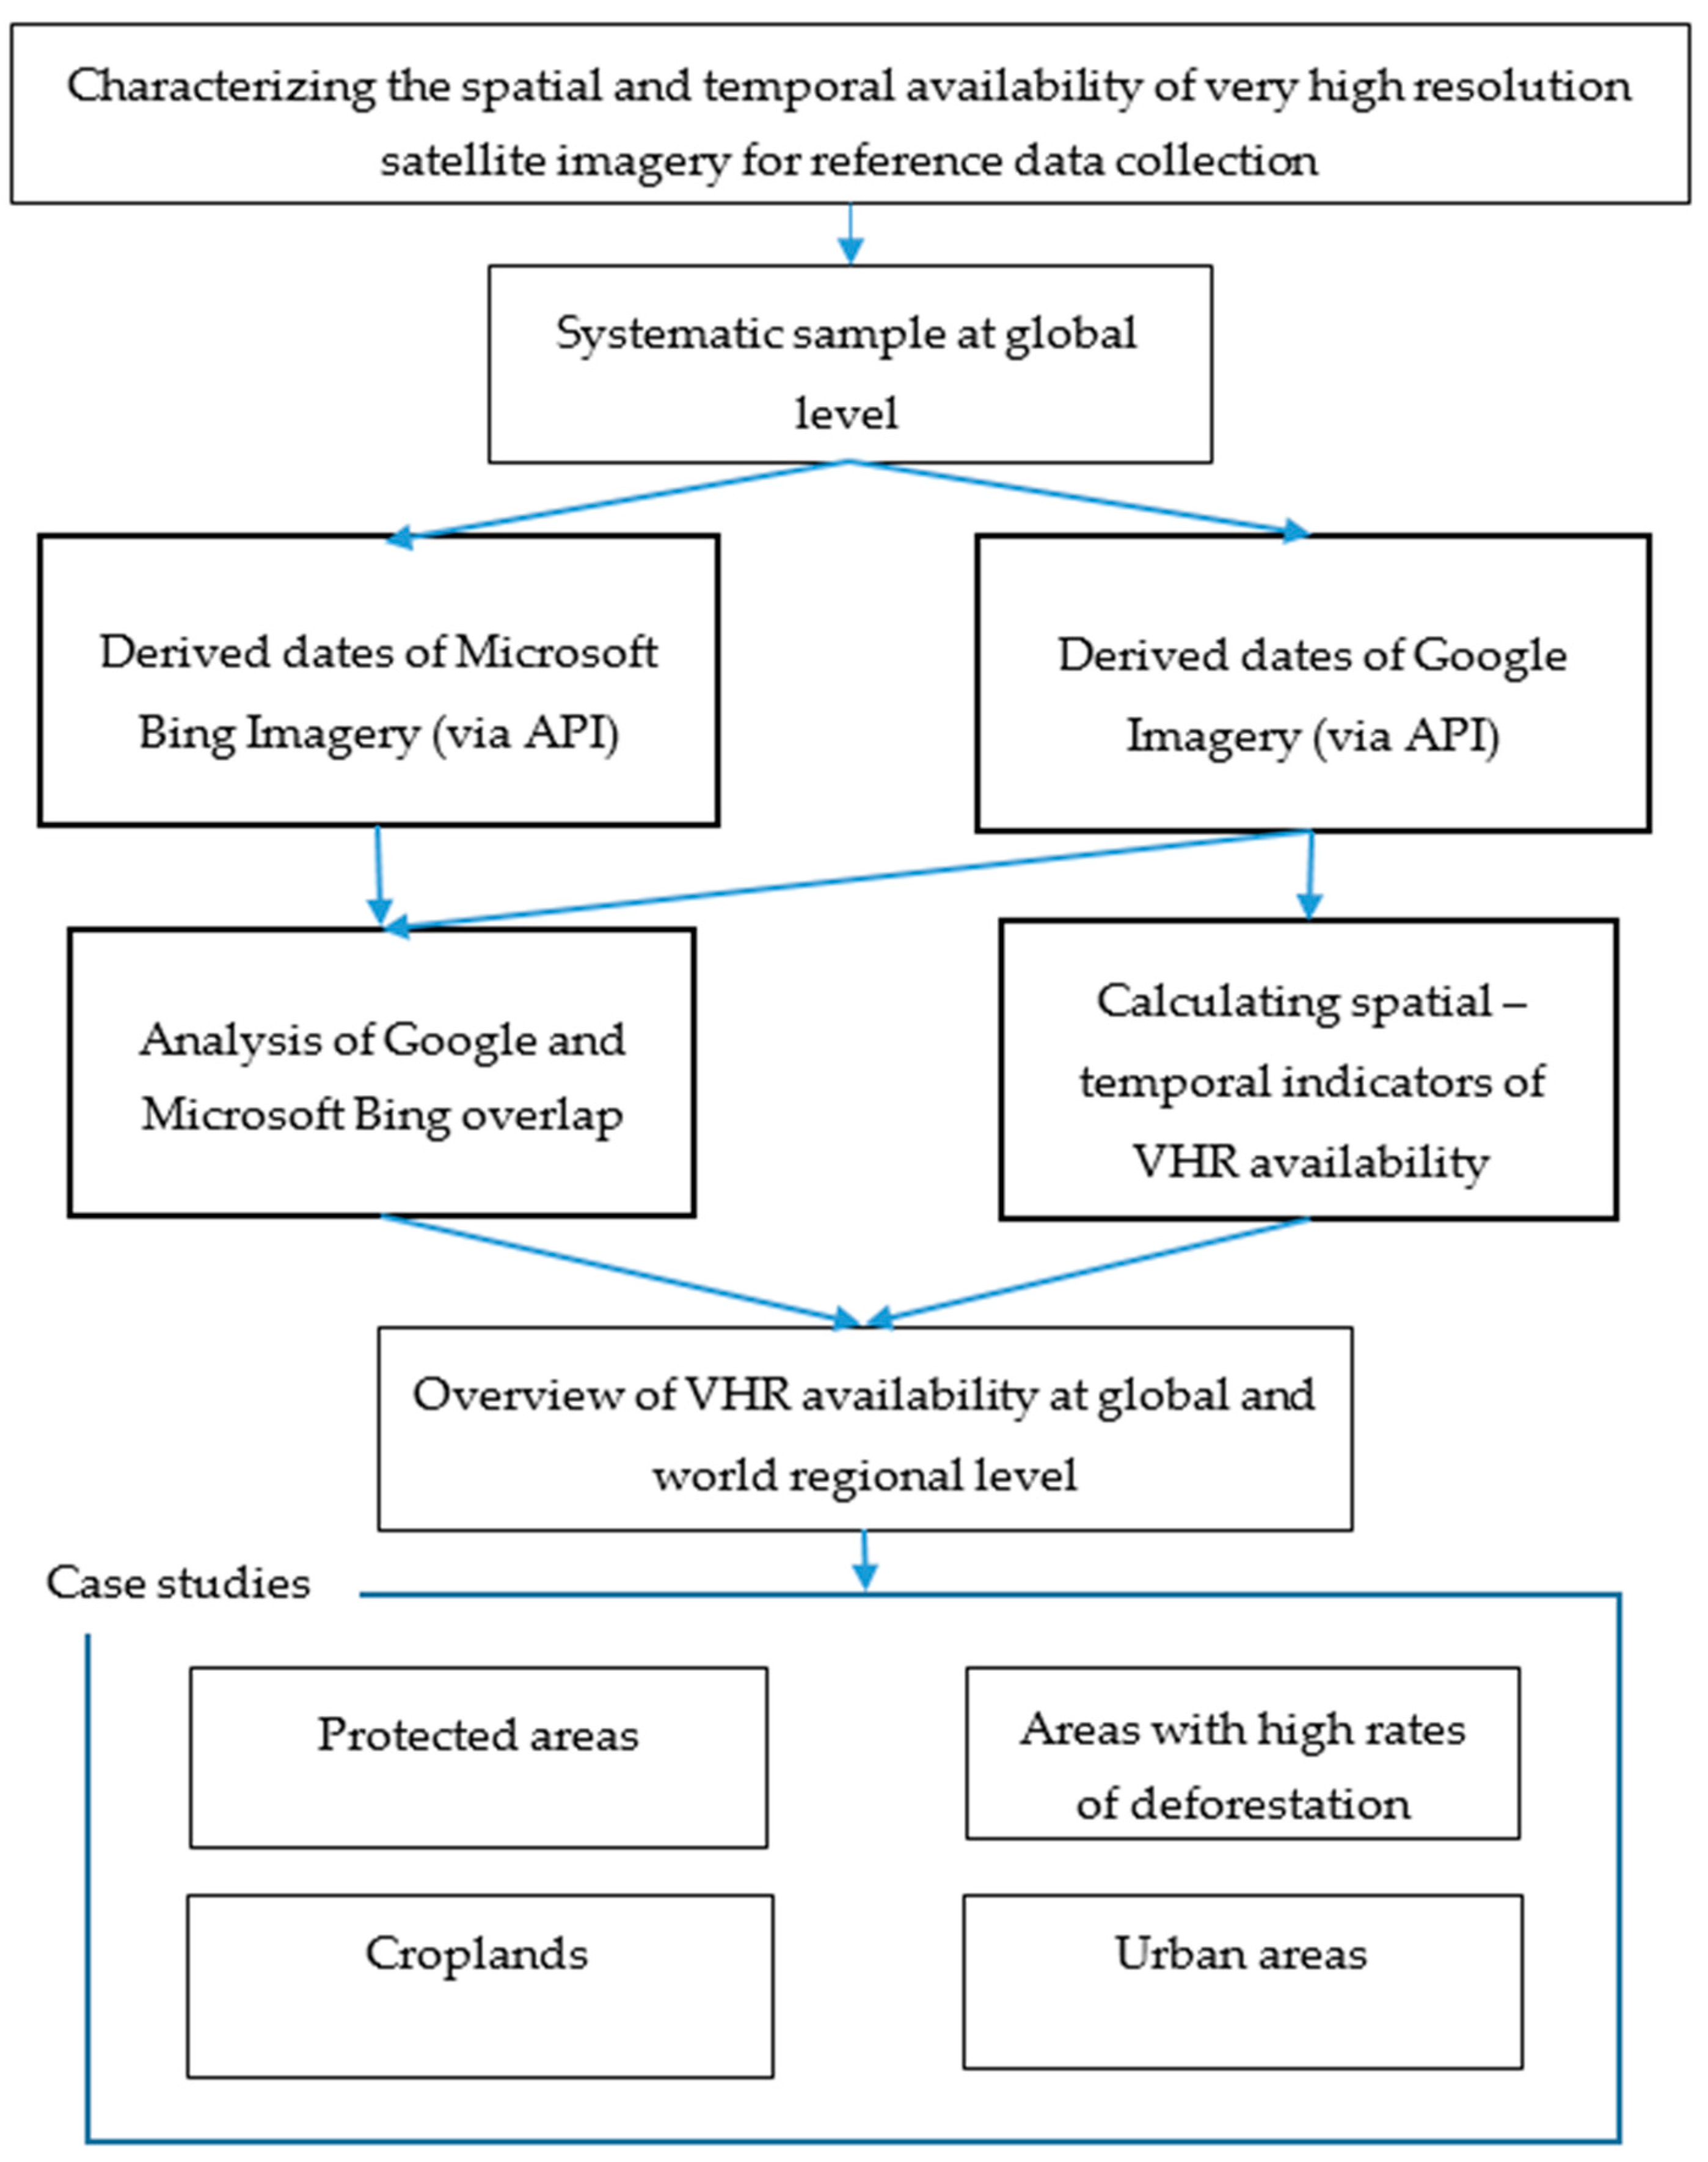 Land | Free Full-Text | Characterizing the Spatial and Temporal  Availability of Very High Resolution Satellite Imagery in Google Earth and  Microsoft Bing Maps as a Source of Reference Data | HTML